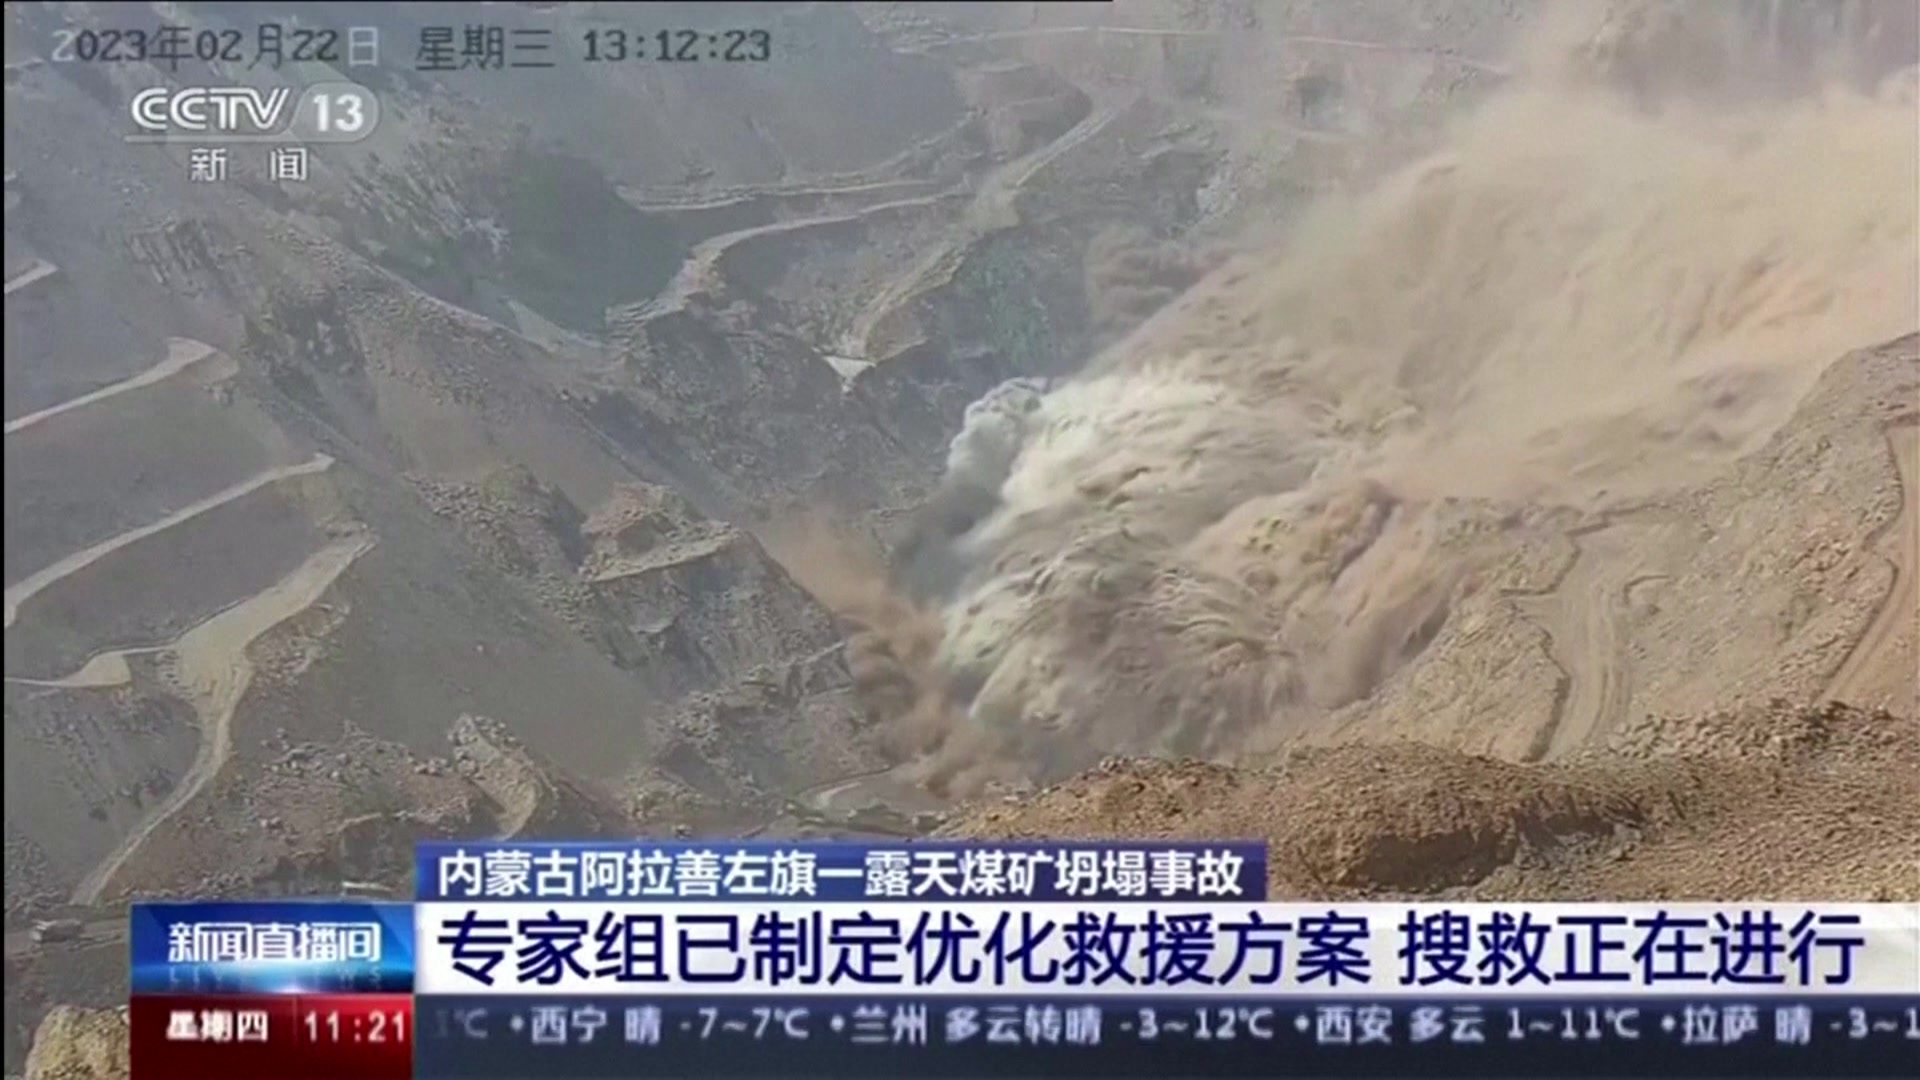 Scores missing after large mine collapse in China